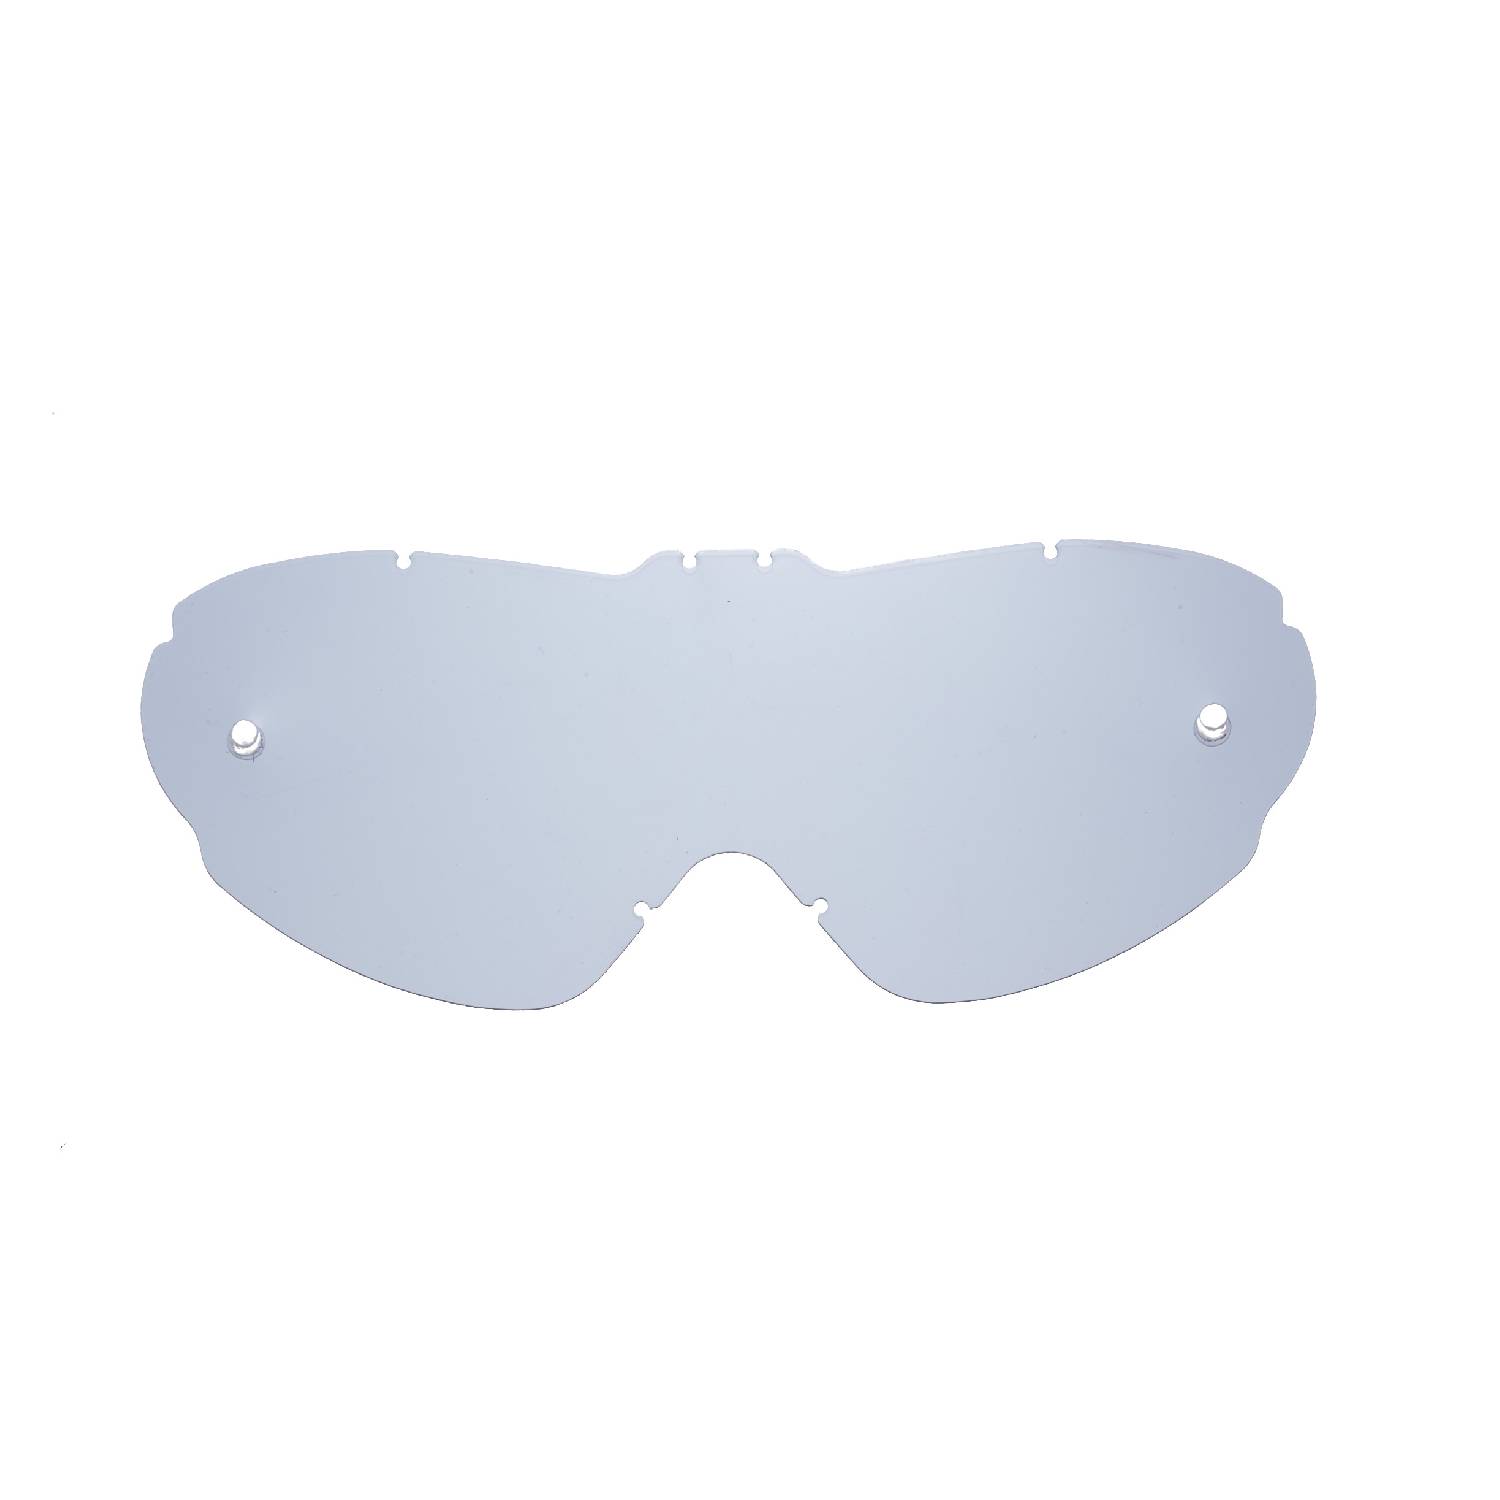 smokey replacement lenses for goggles compatible for Scott Hi voltage work goggle